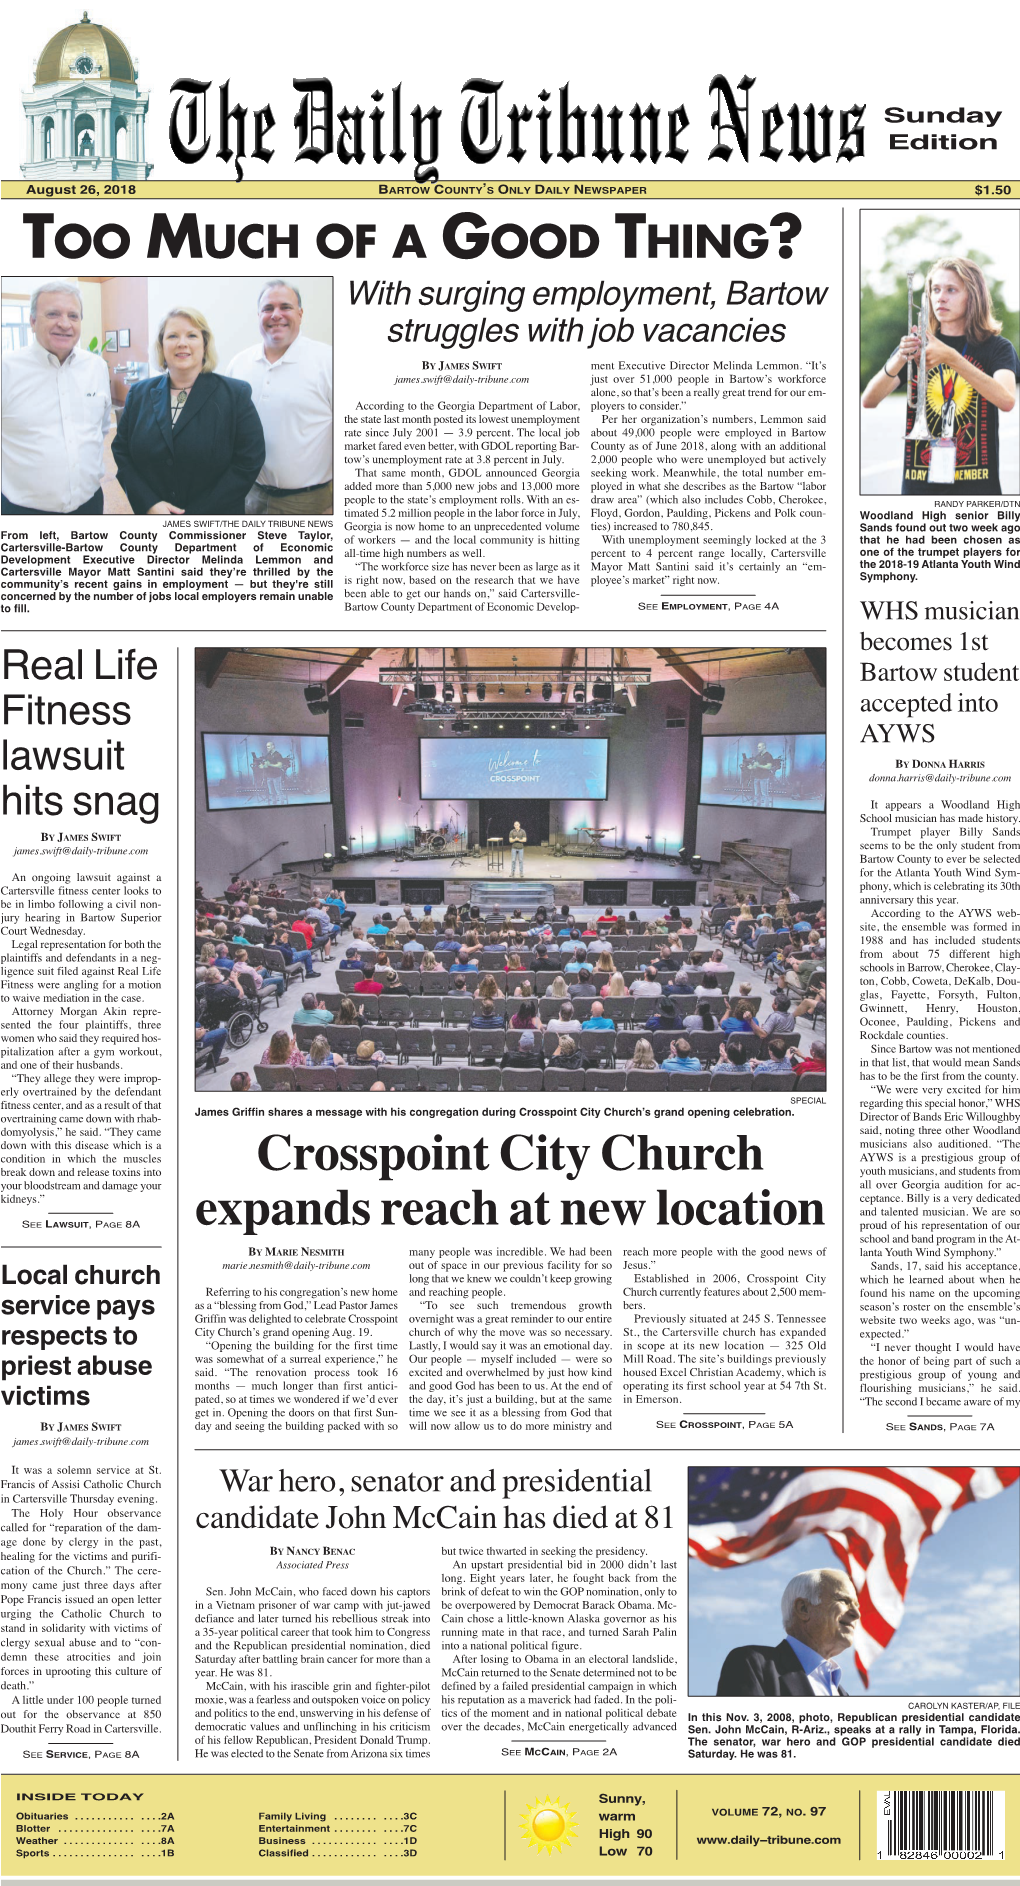 Crosspoint City Church Expands Reach at New Location